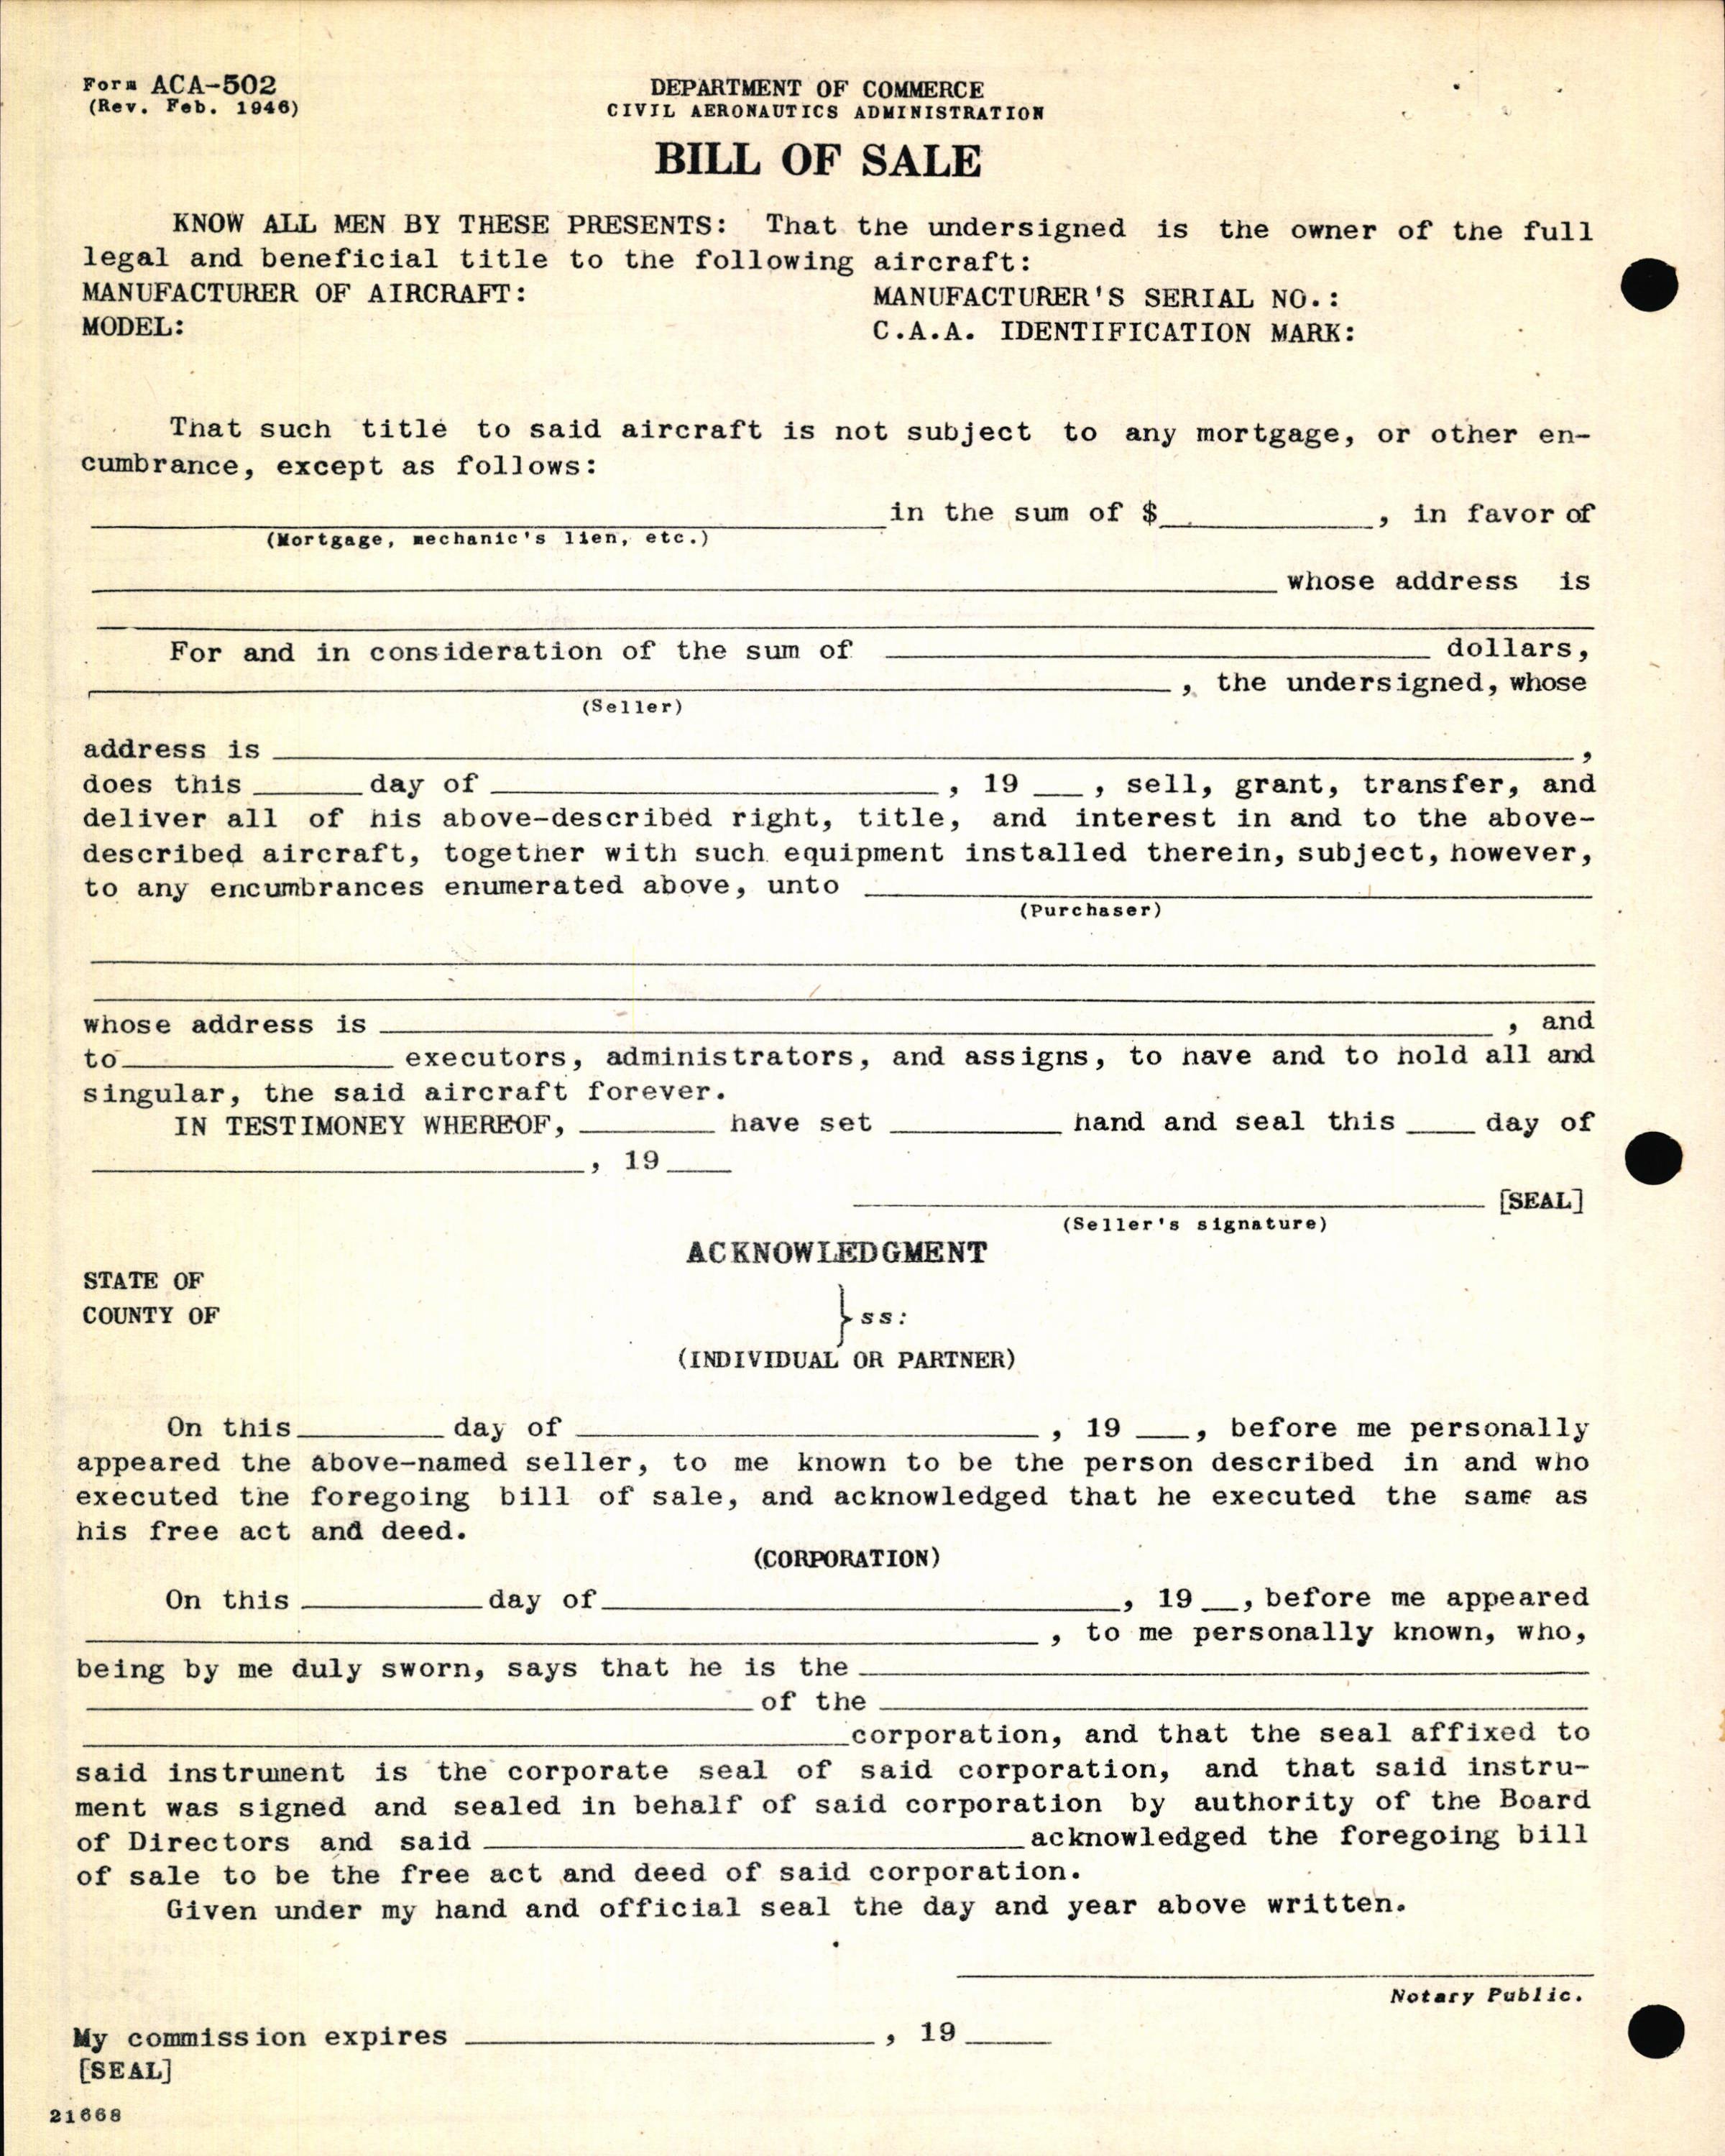 Sample page 6 from AirCorps Library document: Technical Information for Serial Number 1250